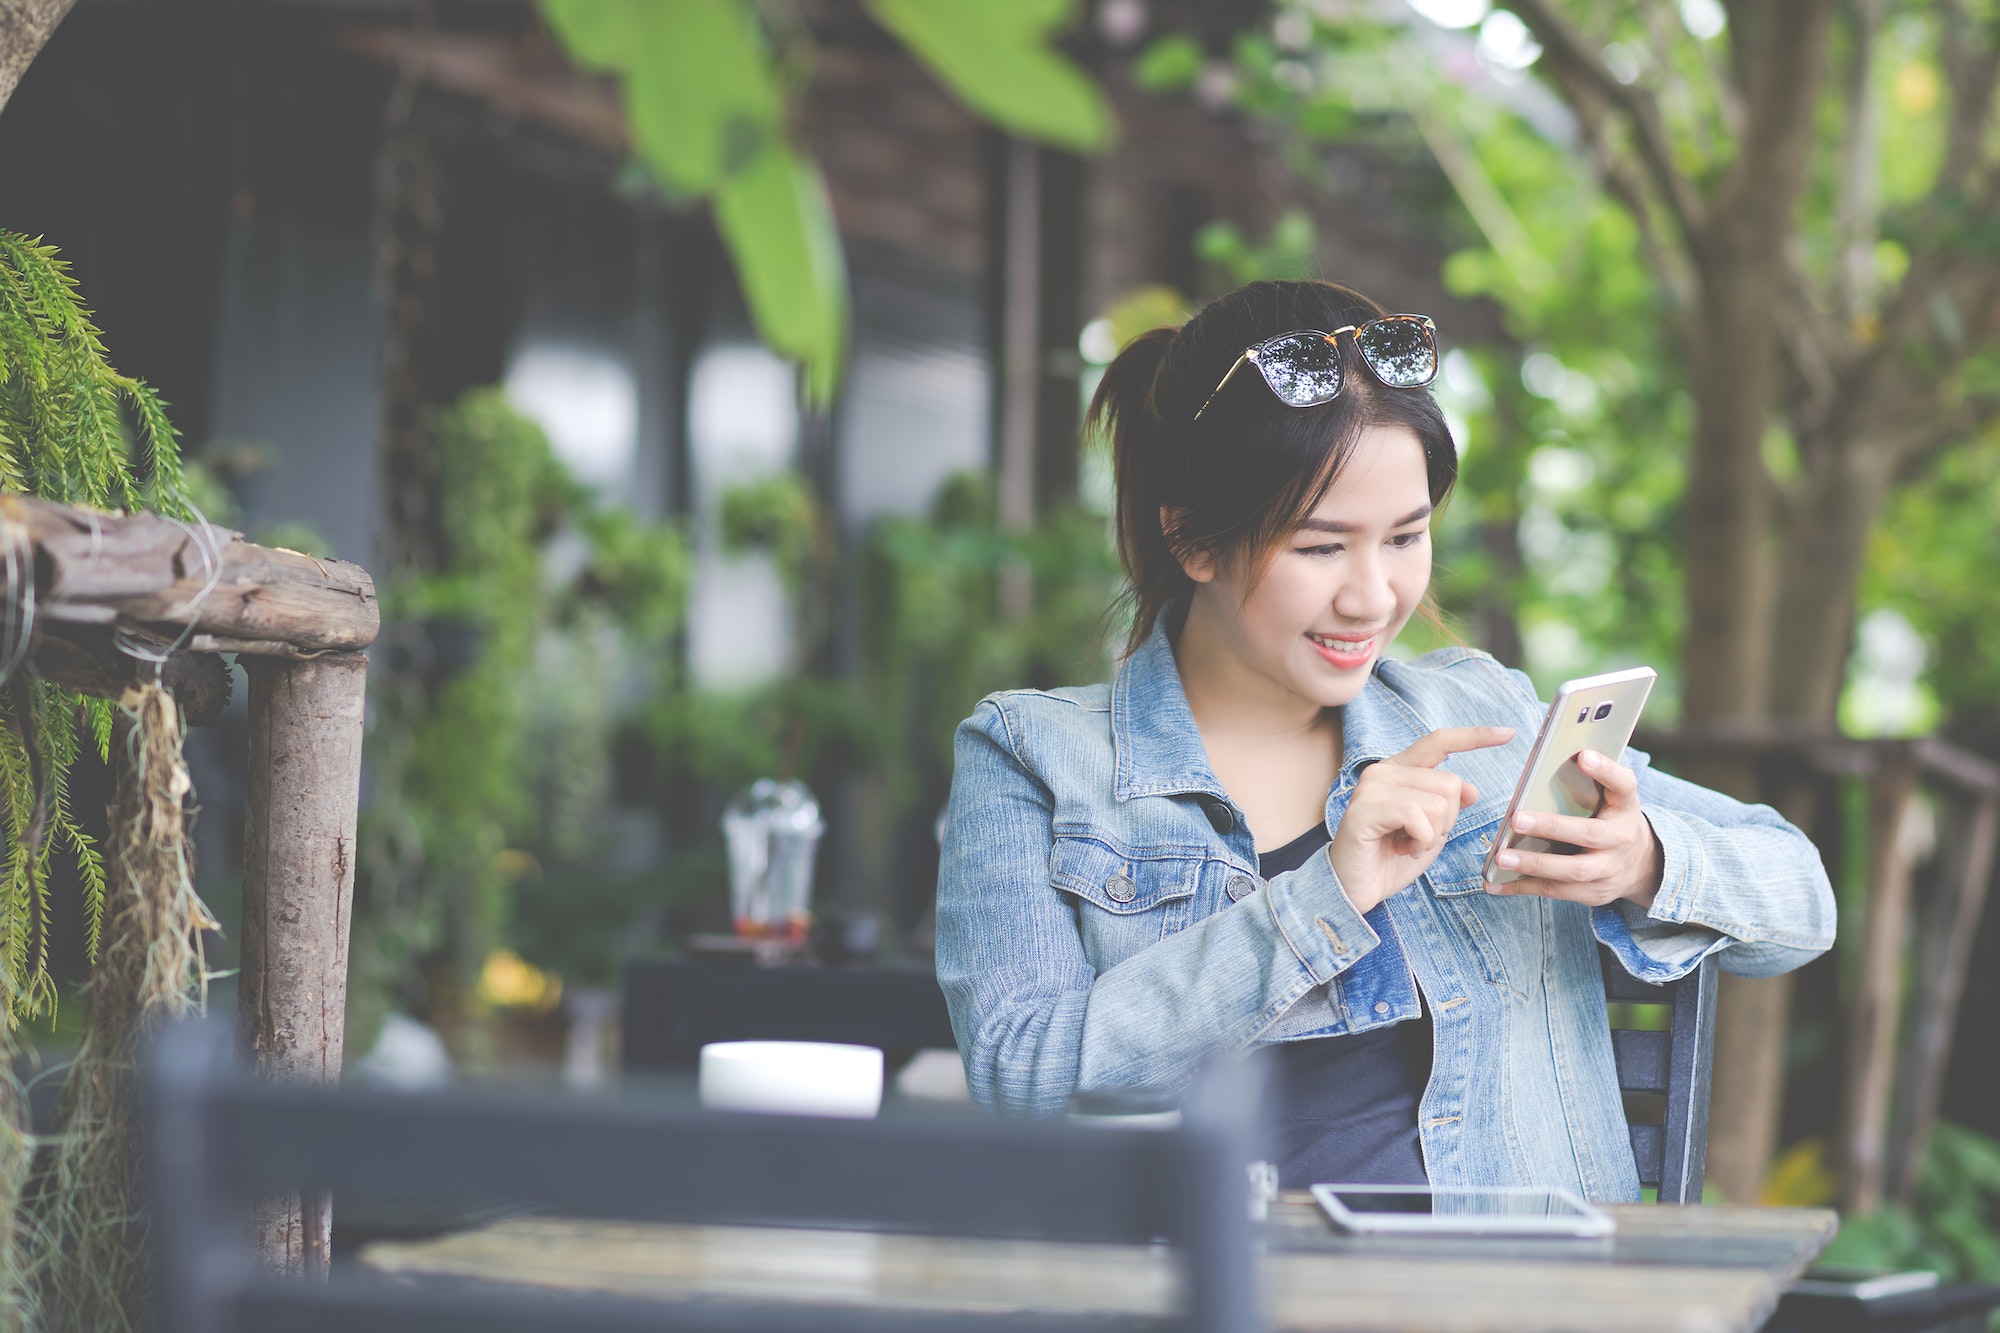 Young asian girl reading news at a coffee shop with a smartphone.